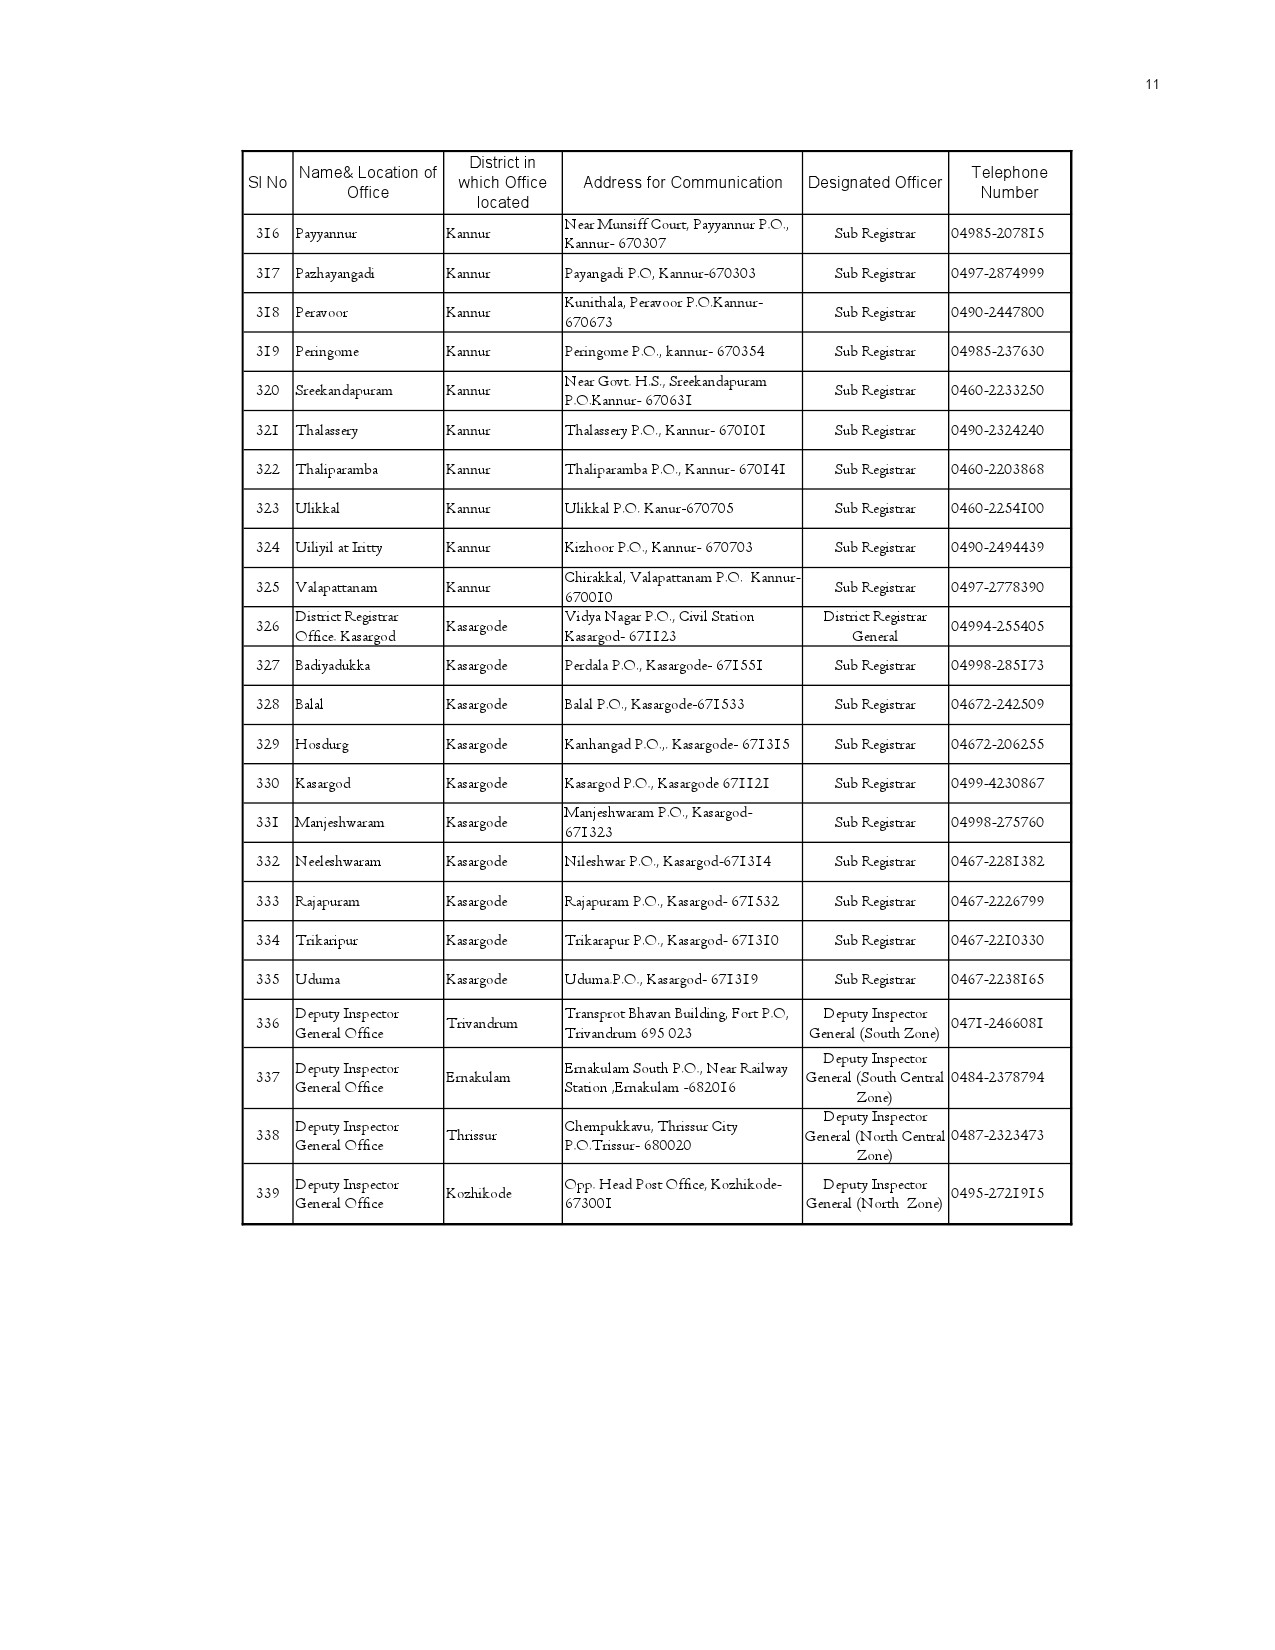 List of Offices in Kerala under the Department of Registration - Notification Image 11